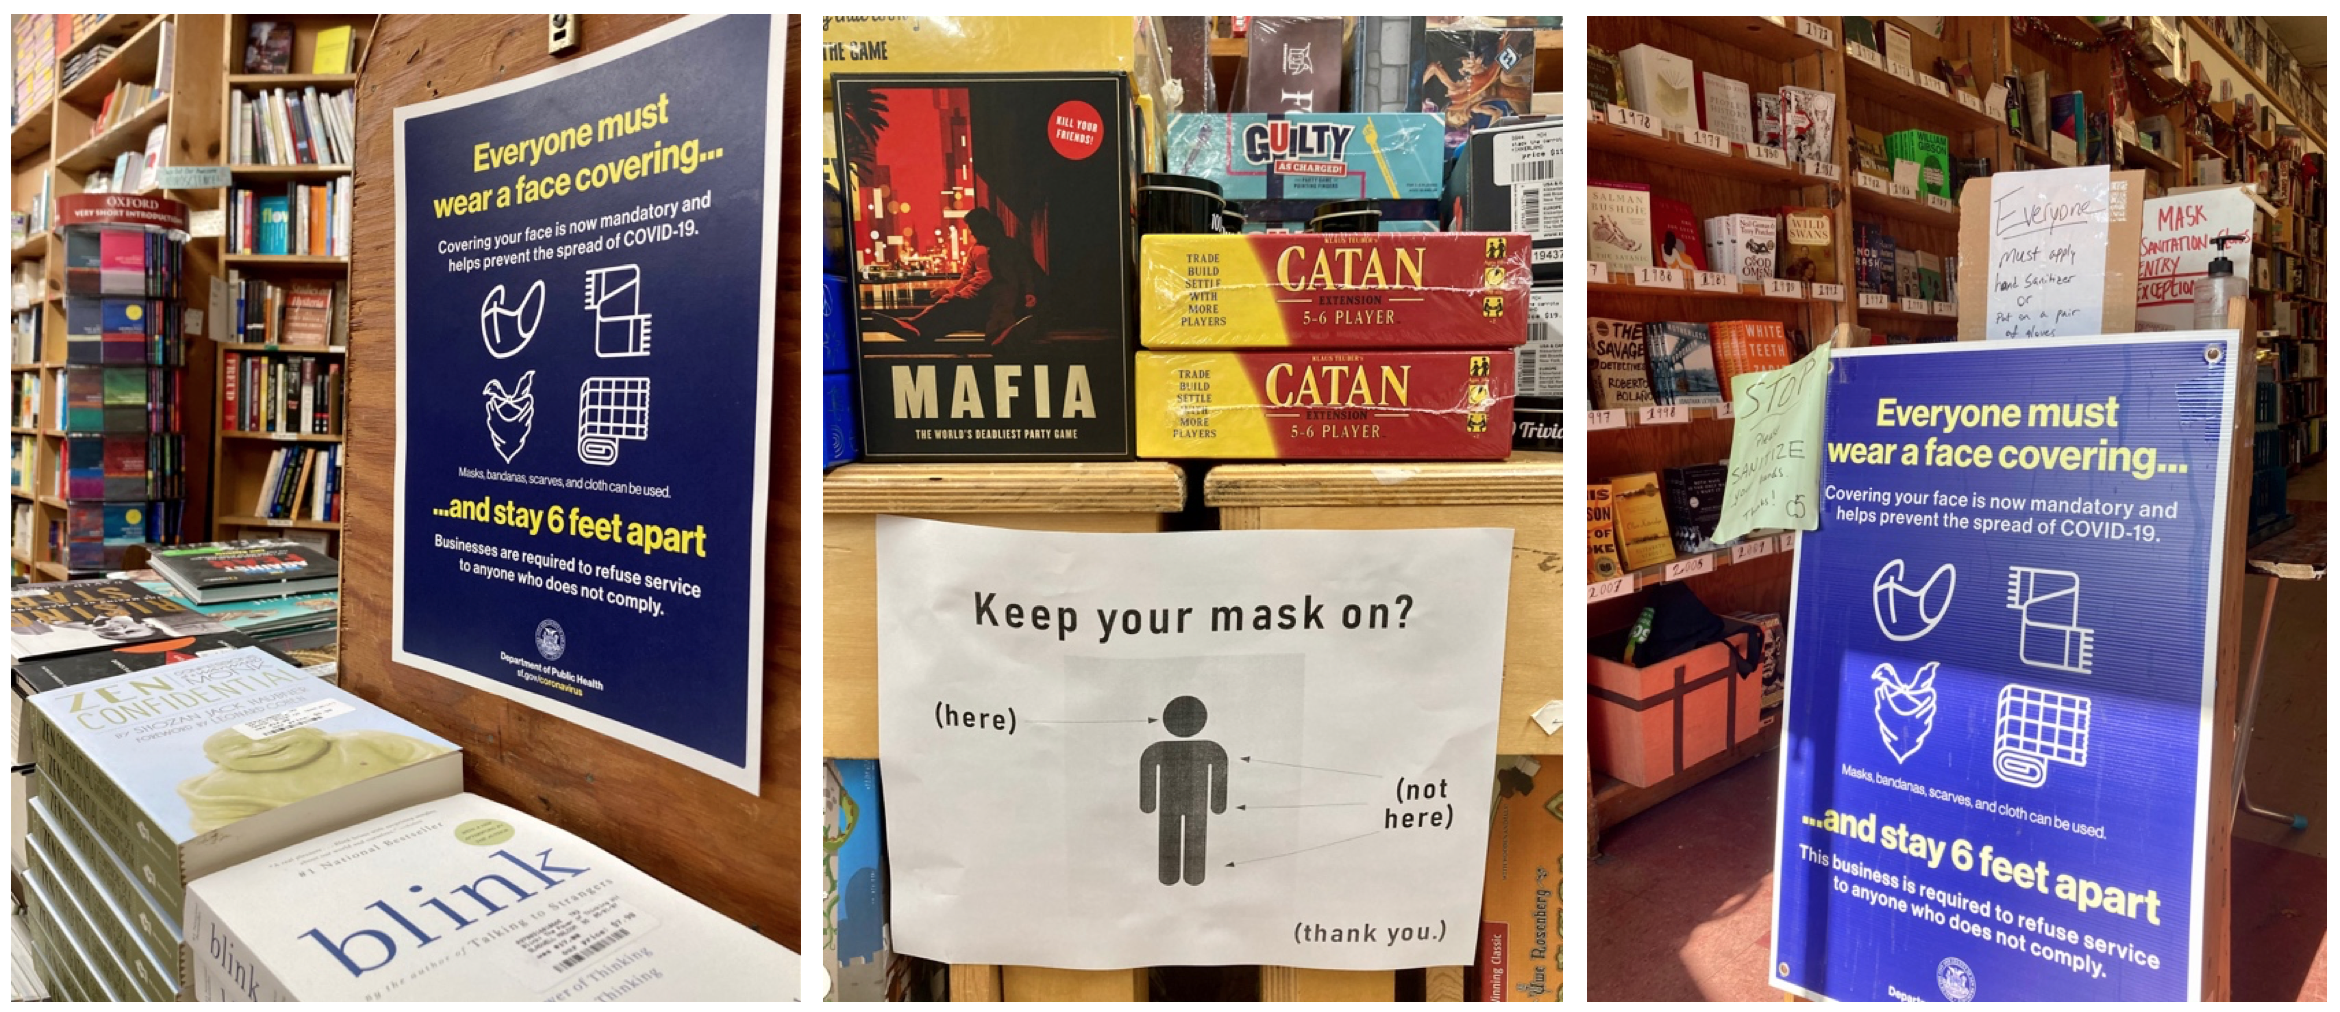 Some COVID-19 safety measures at Green Apple Books.